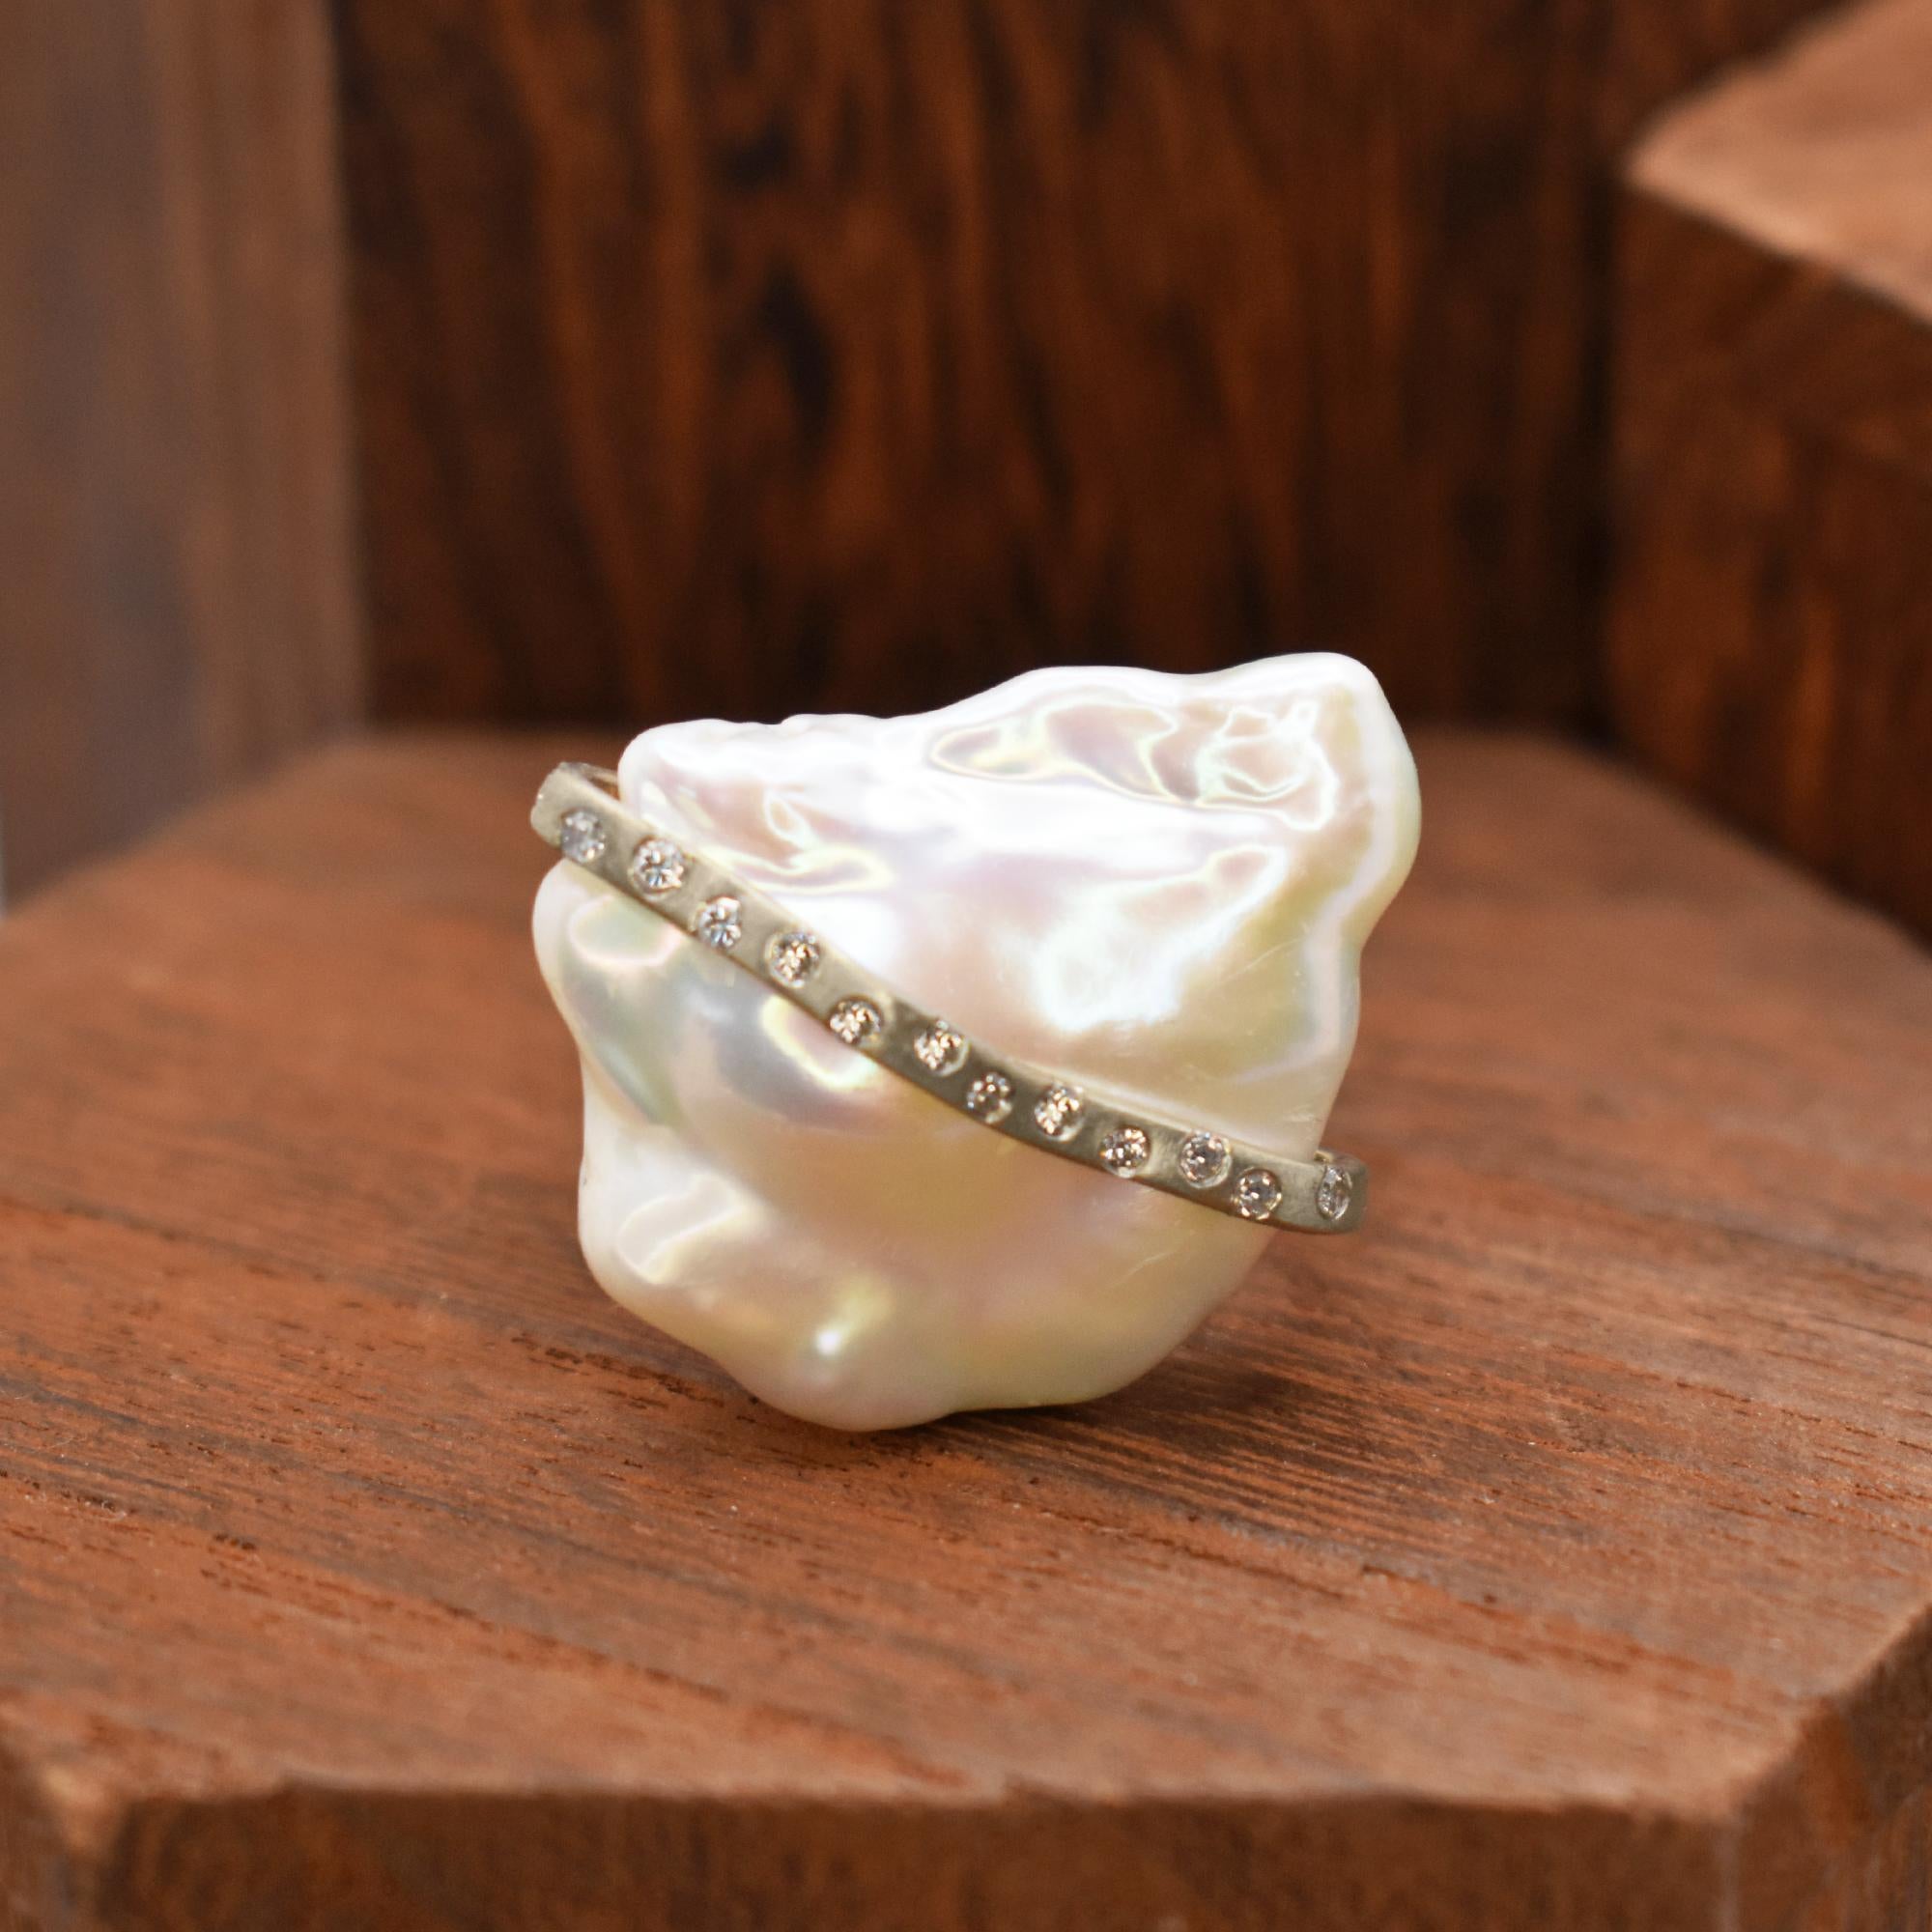 Beautiful Freshwater Baroque Pearl wrapped in a sterling silver river with accent Diamonds. Sterling silver square ring band is 12mm wide and is a size 7, but is resizable. Silver metal is finished with a brushed texture. This Vicki Orr Designs ring